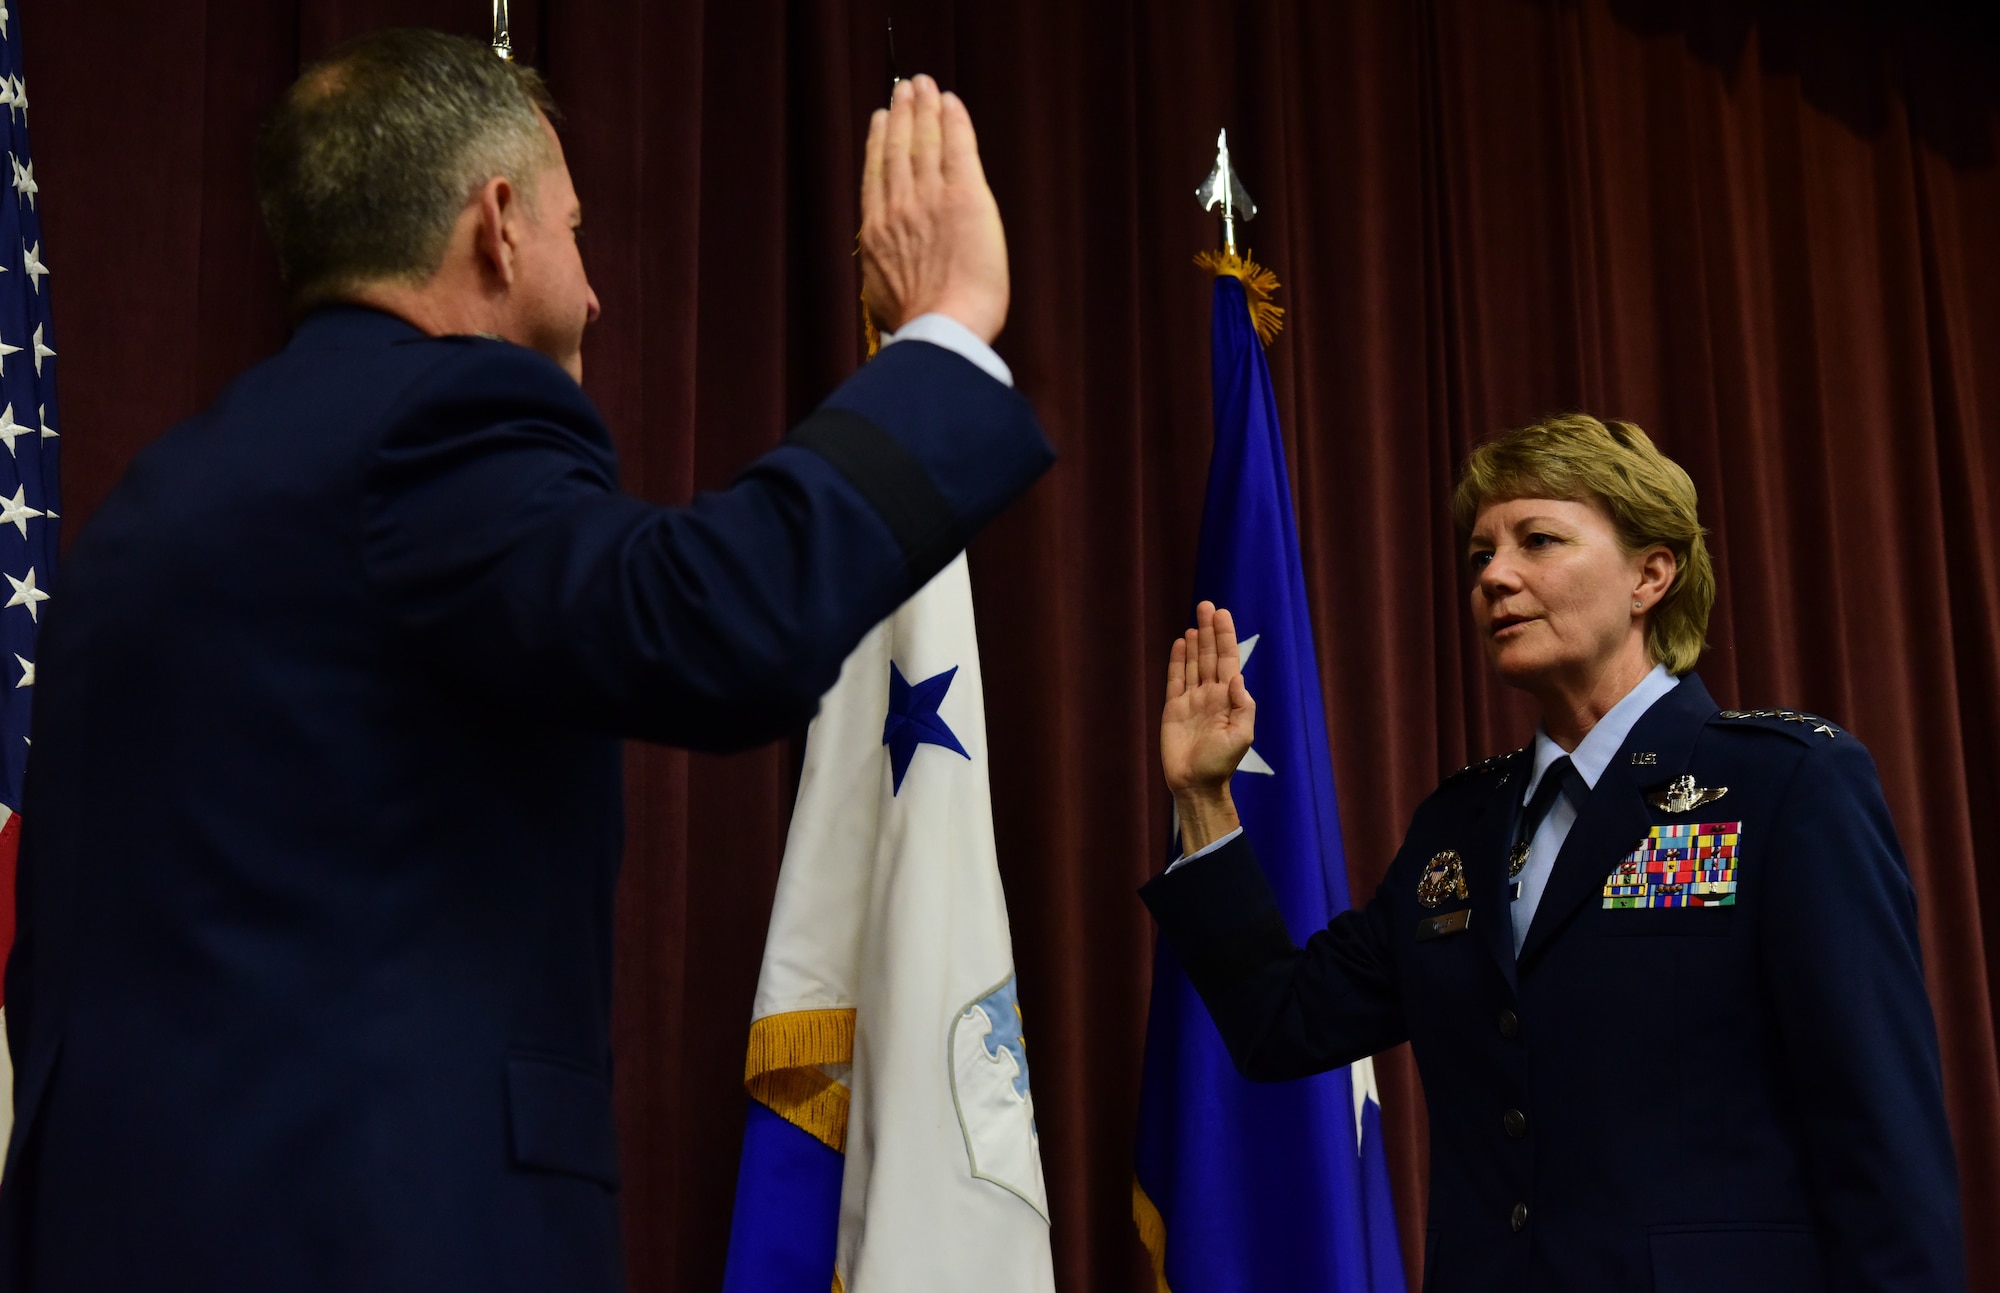 Gen. Maryanne Miller, incoming Air Mobility Command commander, receives the oath of office from Air Force Chief of Staff Gen. David L. Goldfein during a promotion ceremony at Scott Air Force Base, Illinois, Sept. 7, 2018. Previous to this assignment, Miller served as the commander of Air Force Reserve Command and chief of the Air Force Reserve. Miller became the first Reserve Airman to become a four-star general and the first Reserve Airman to command an Air Force major command outside of AFRC. AMC relies on a total force of more than 106,000 active-duty, Guard, Reserve, and civilian mobility professionals. (U.S. Air Force photo by Staff Sgt. Michael Cossaboom)